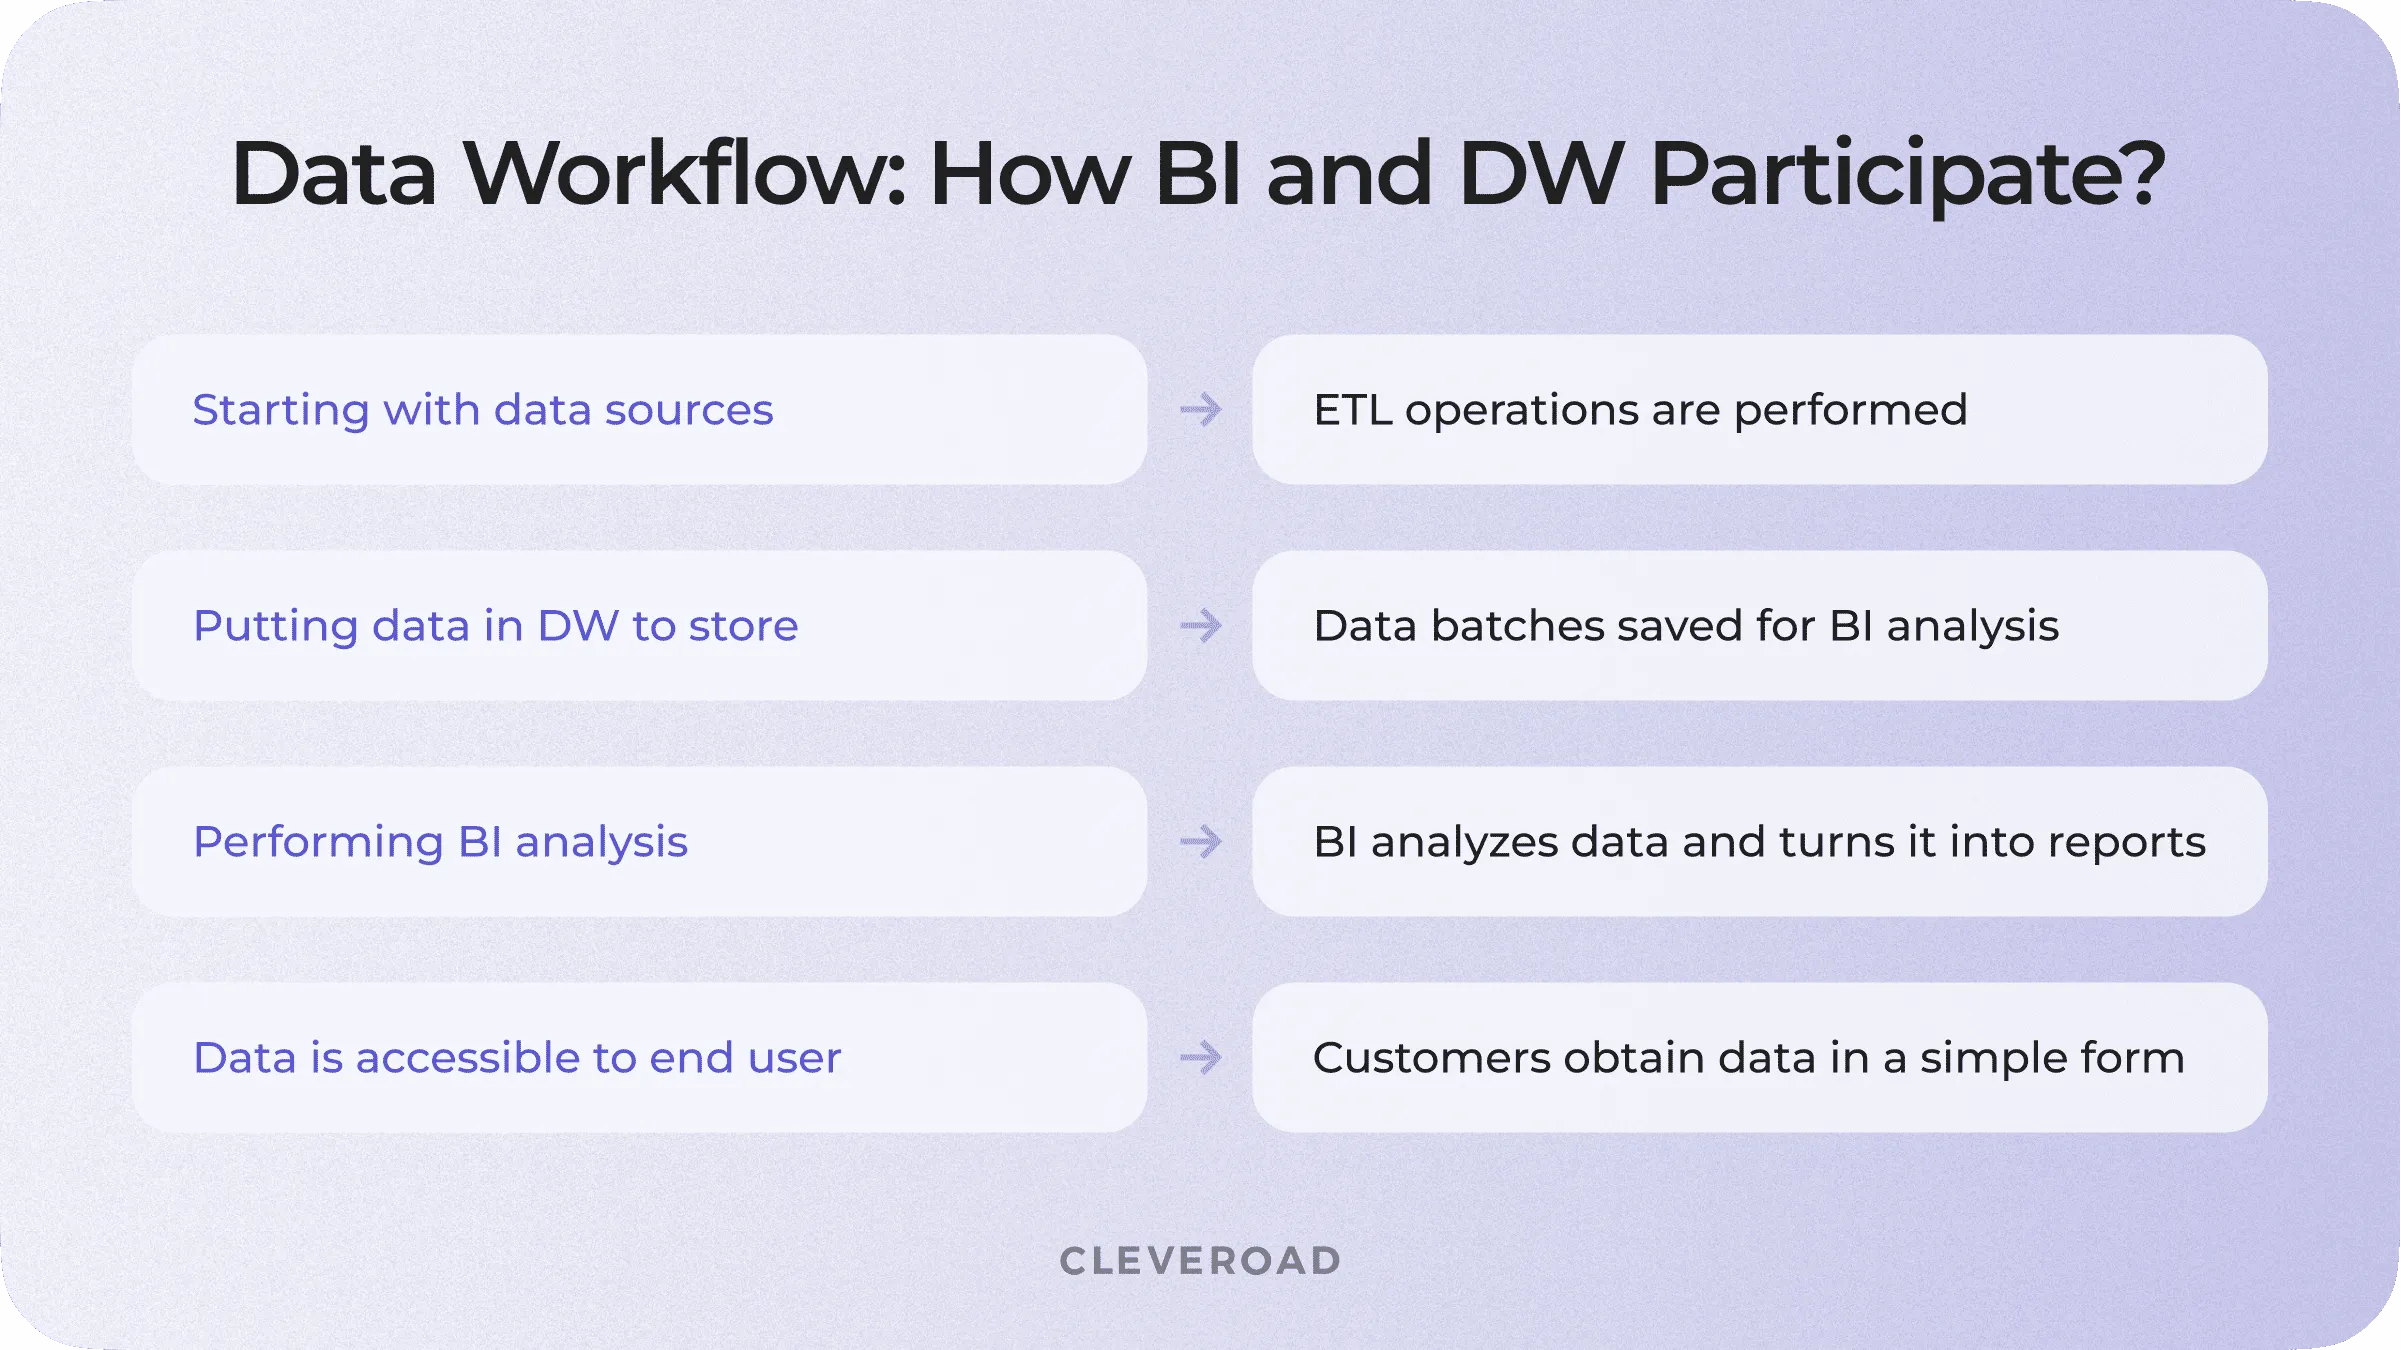 Data processing workflow: How BI and DW participate